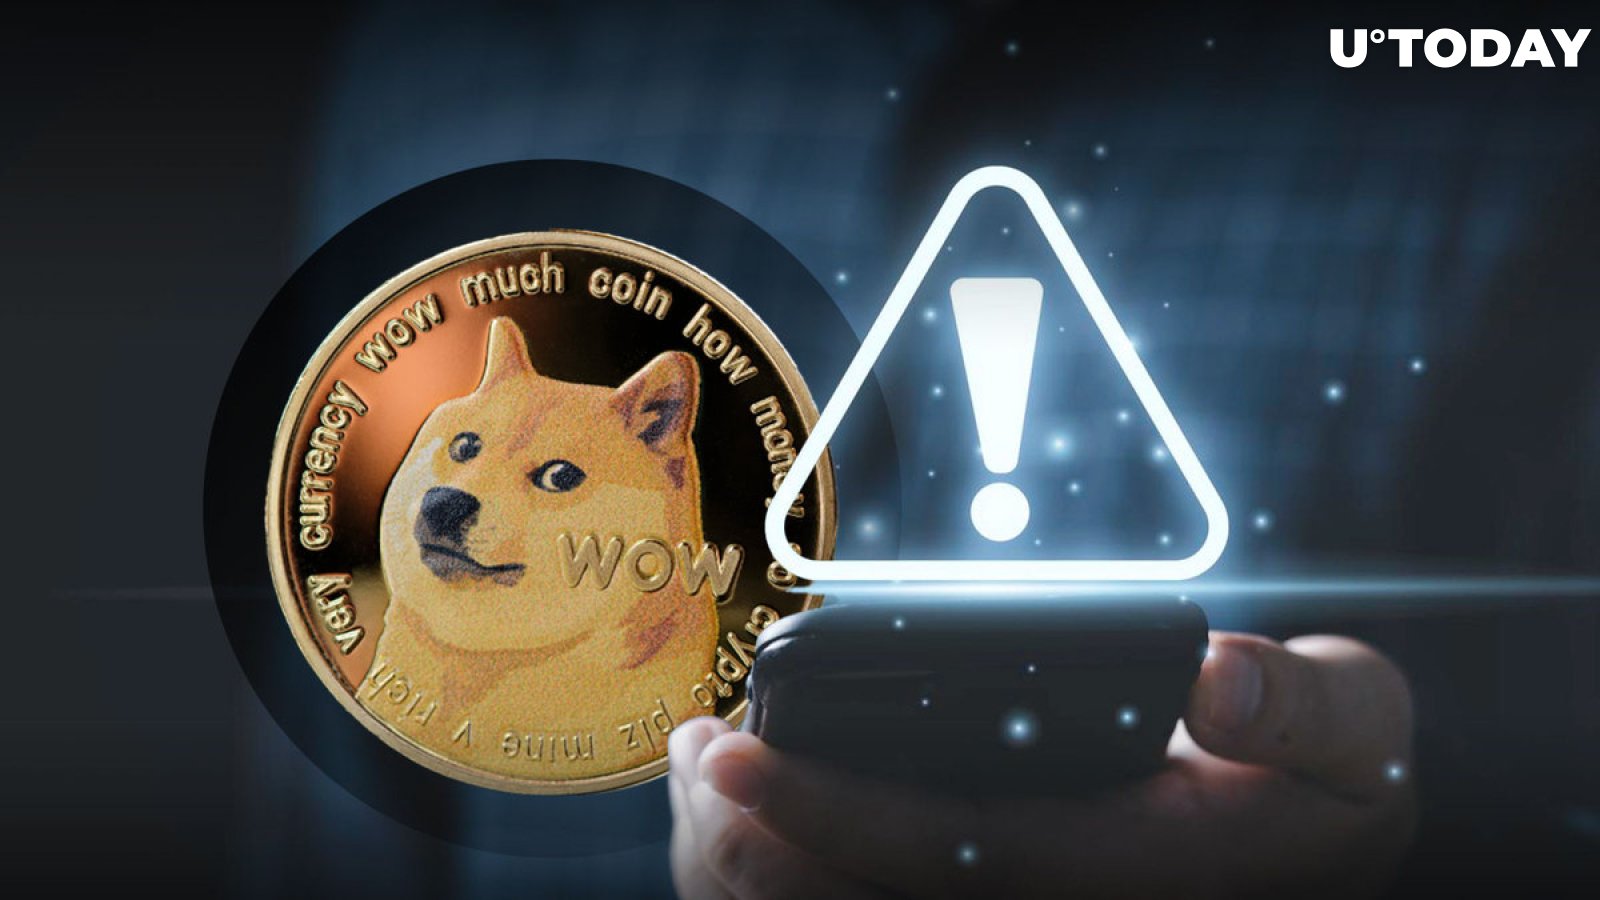 Dogecoin community receives crucial warning: No Dogecoin airdrop